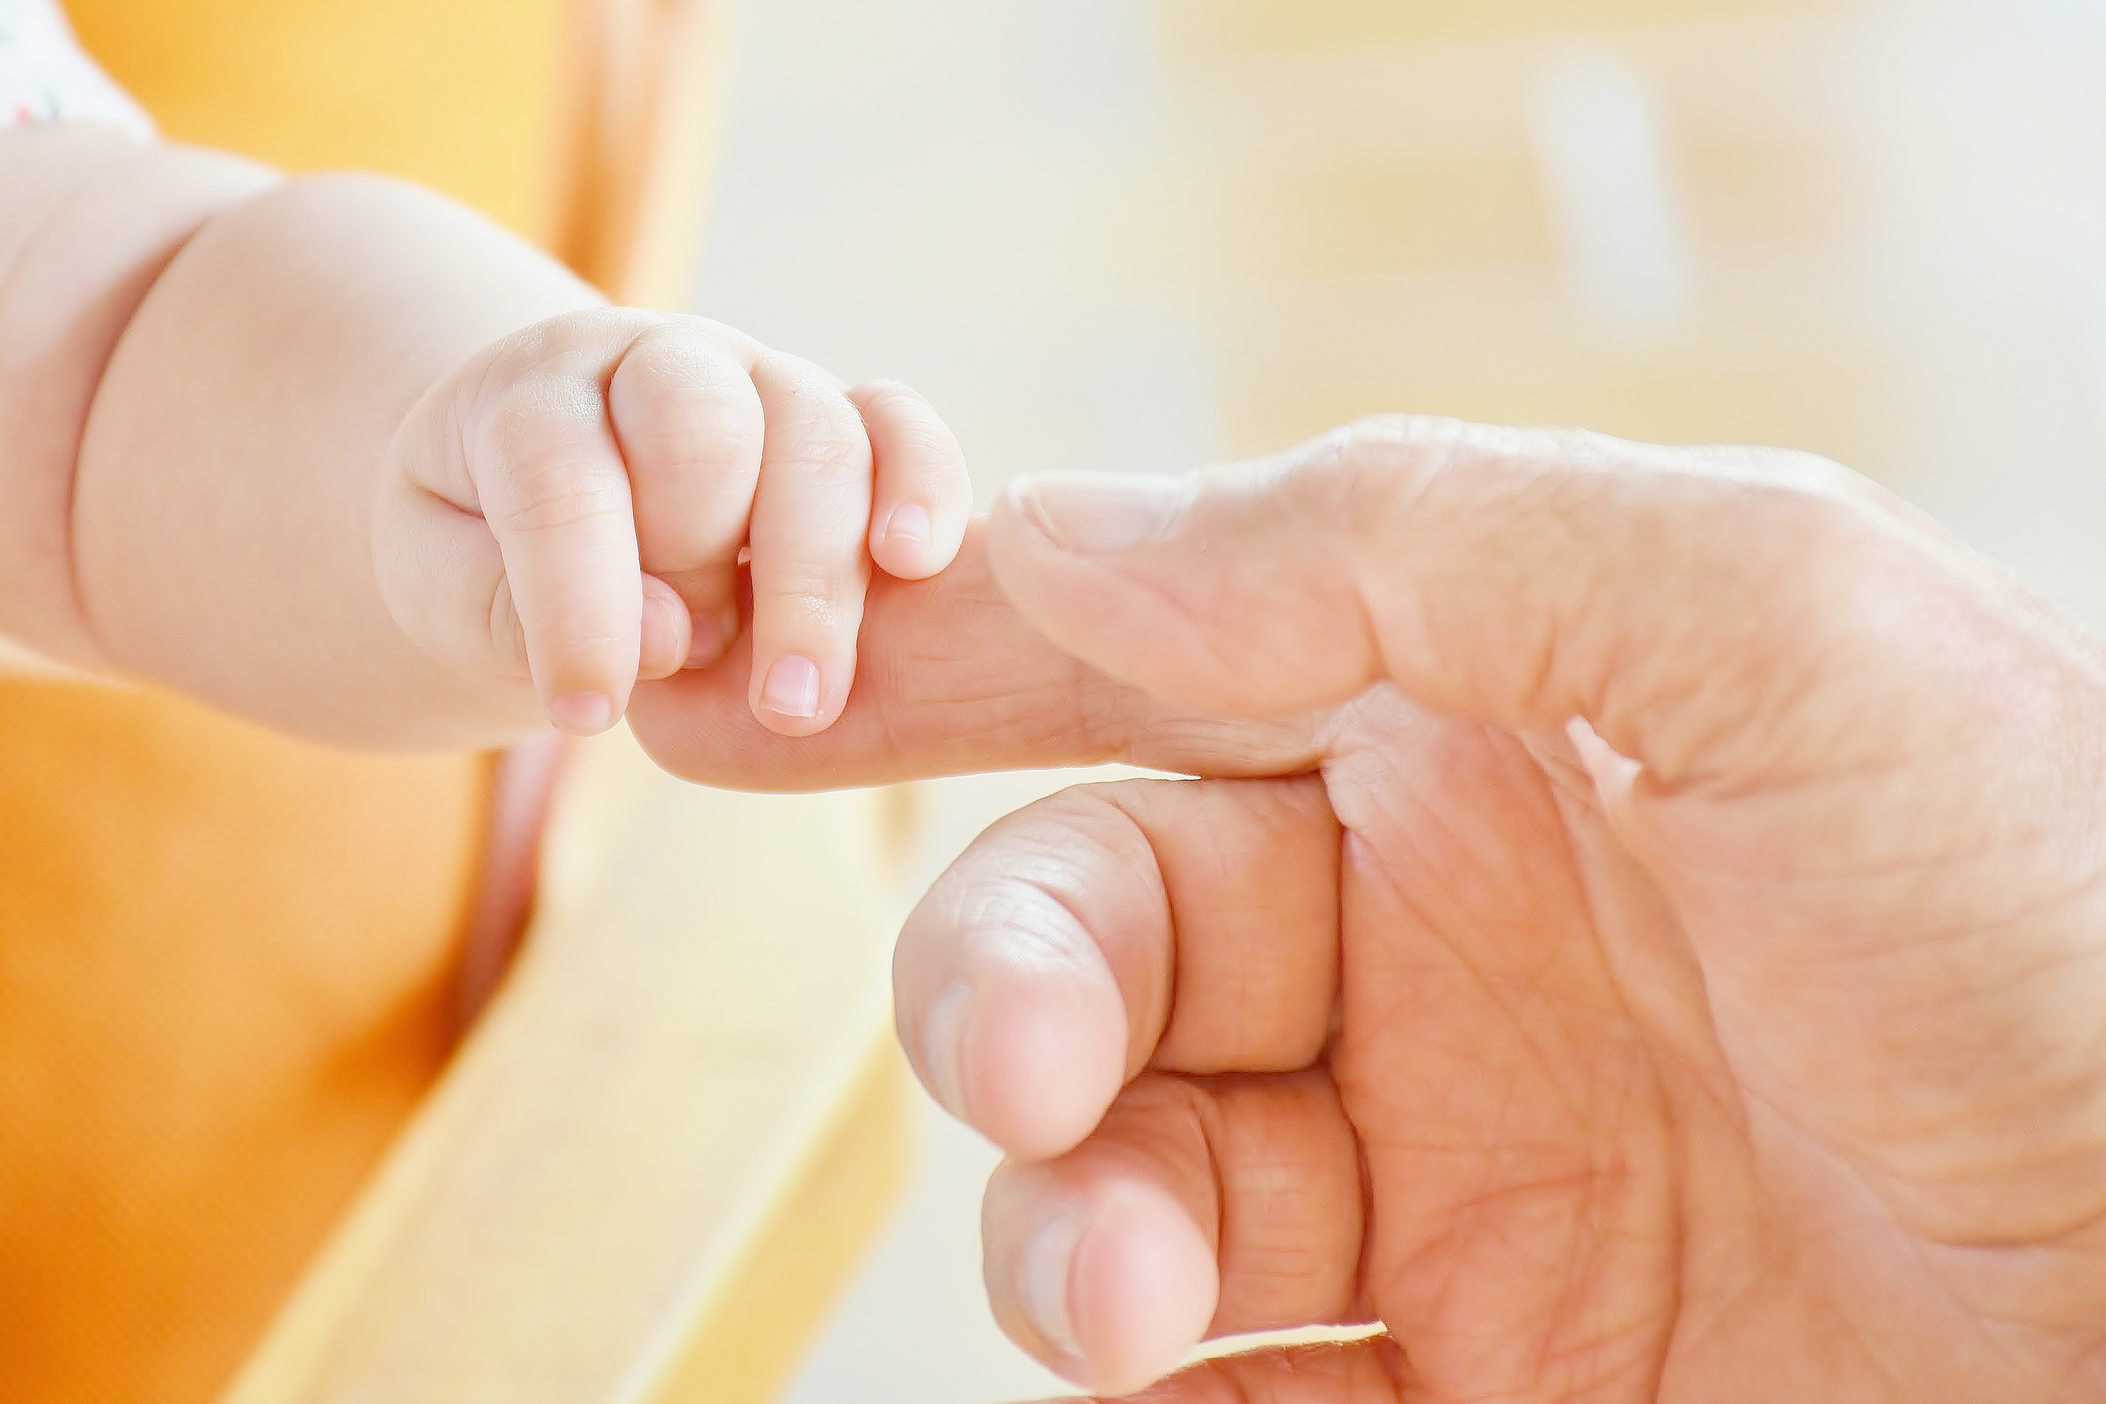 Image shows a baby's hand holding an adult index finger.